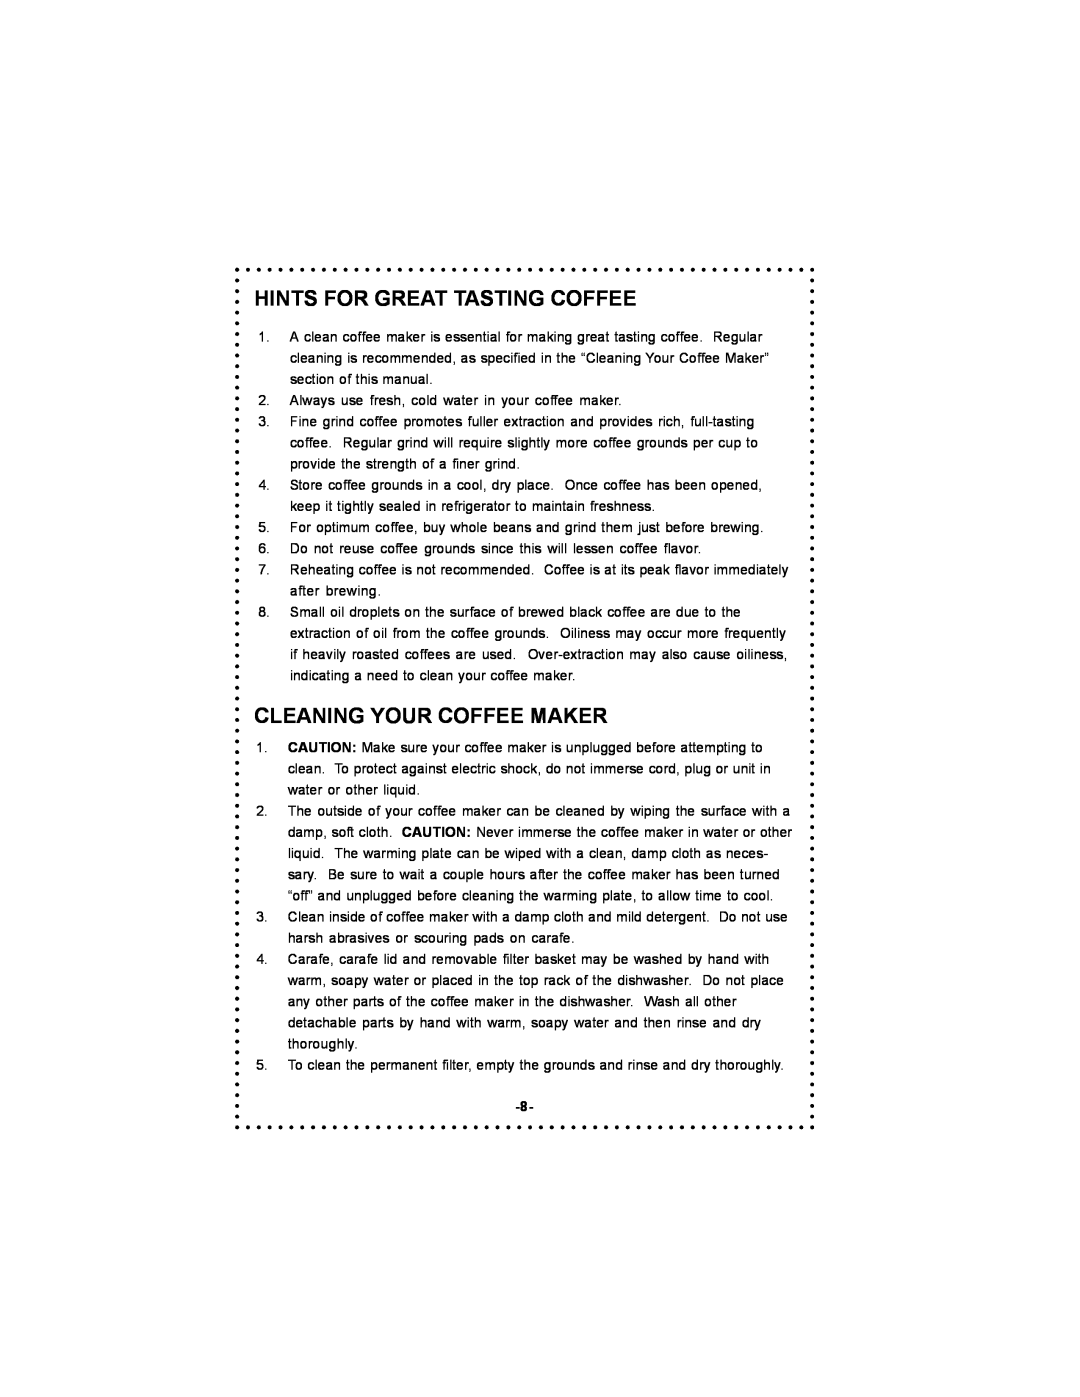 DeLonghi DC500 instruction manual Hints For Great Tasting Coffee, Cleaning Your Coffee Maker 